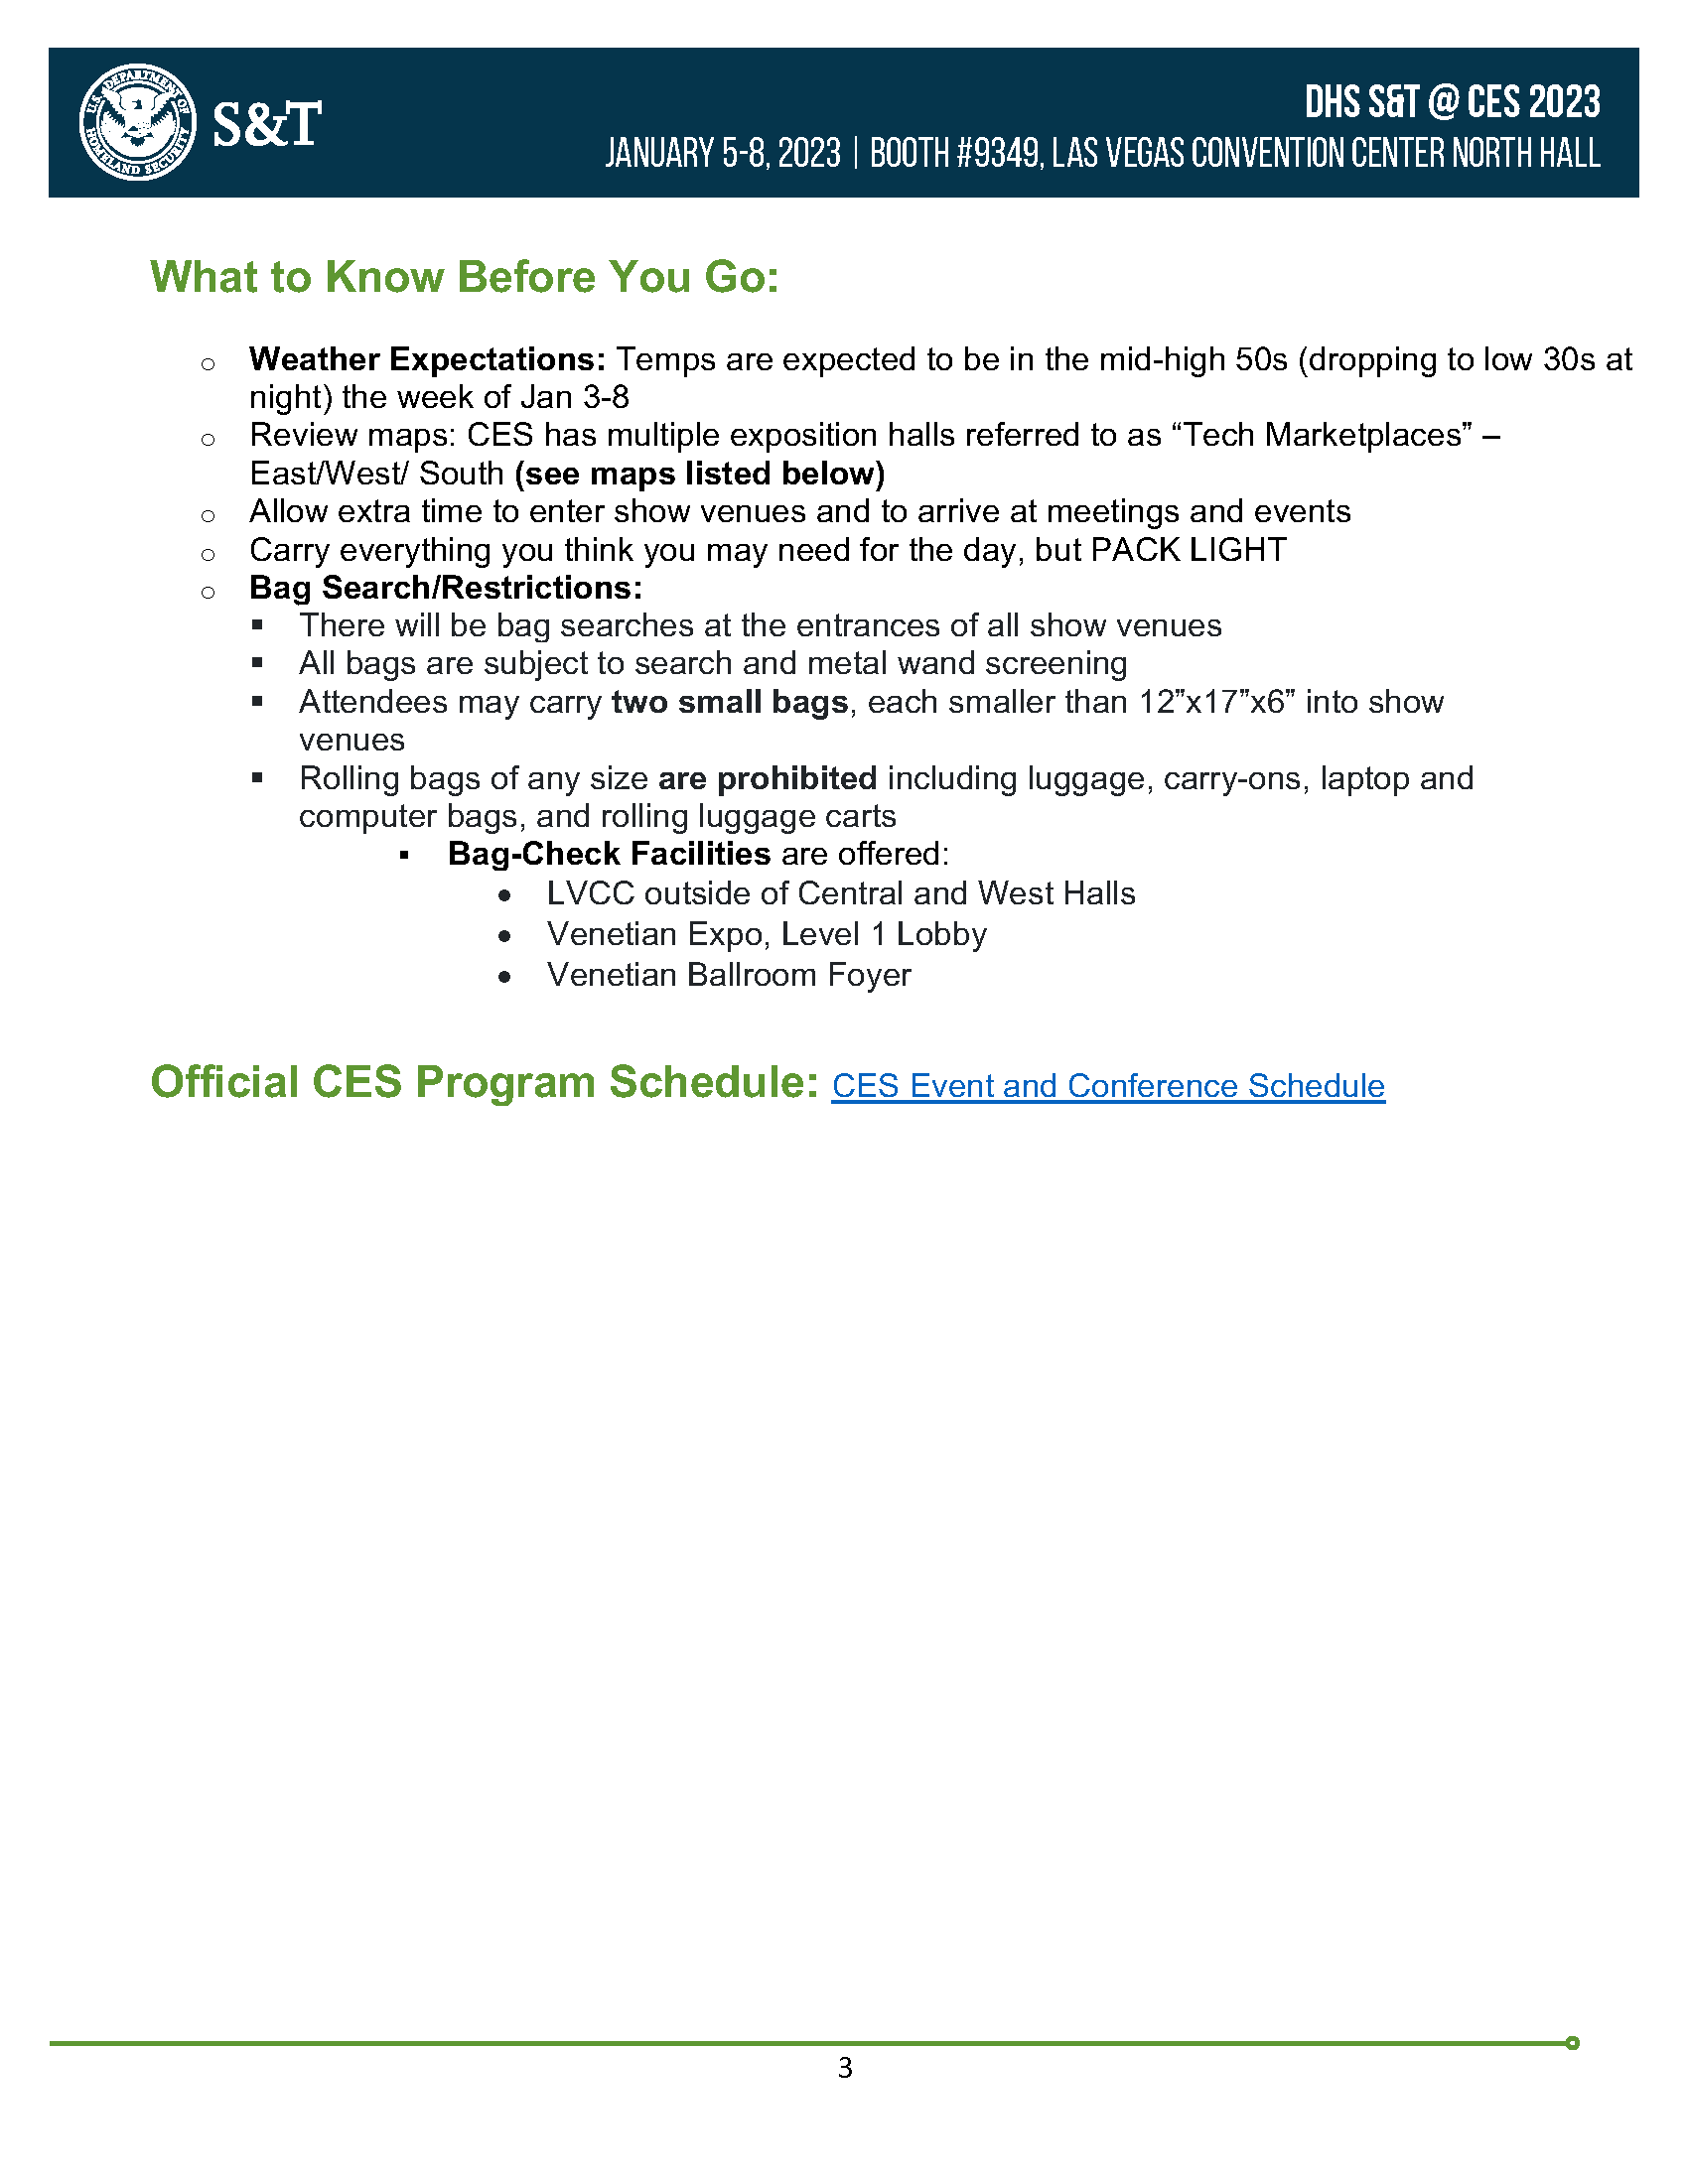 CES Readahead Document_Page_03.png